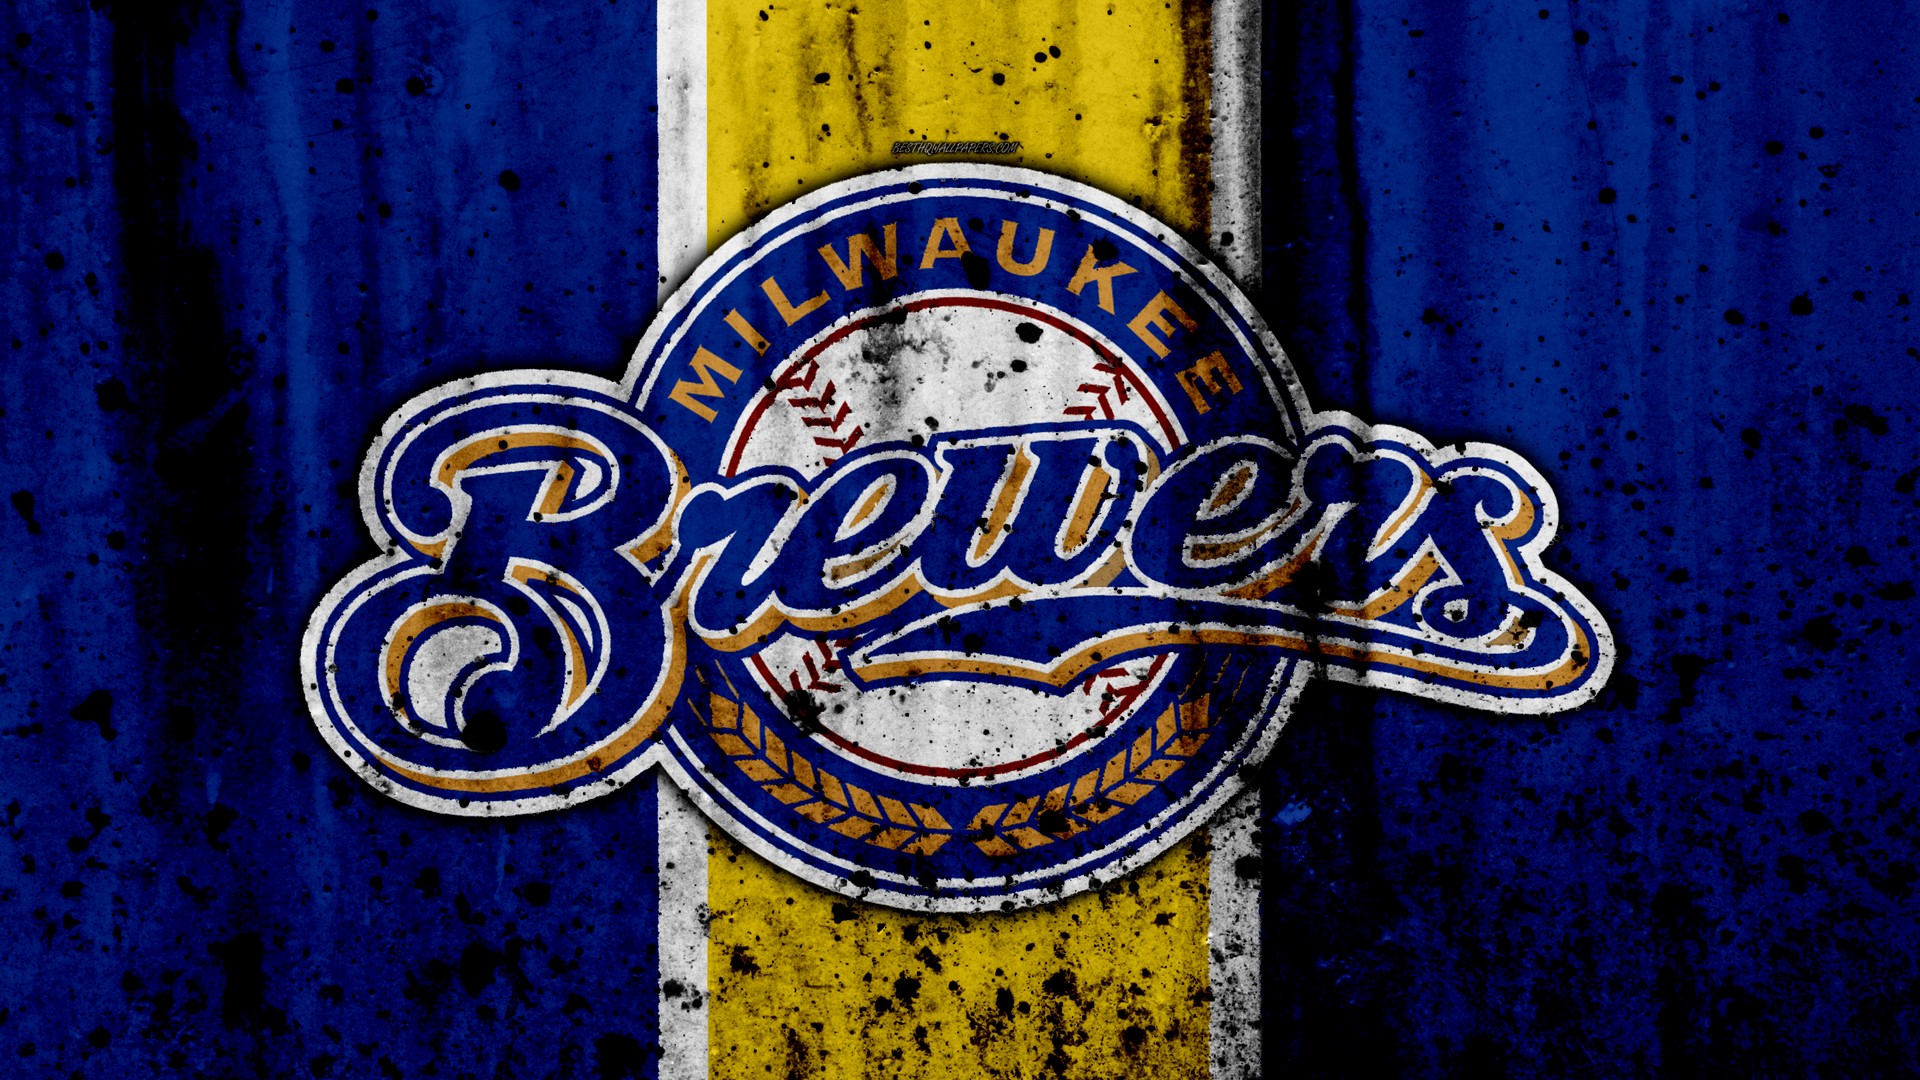 Milwaukee Brewers Backgrounds HD with high-resolution 1920x1080 pixel. You can use this wallpaper for Mac Desktop Wallpaper, Laptop Screensavers, Android Wallpapers, Tablet or iPhone Home Screen and another mobile phone device